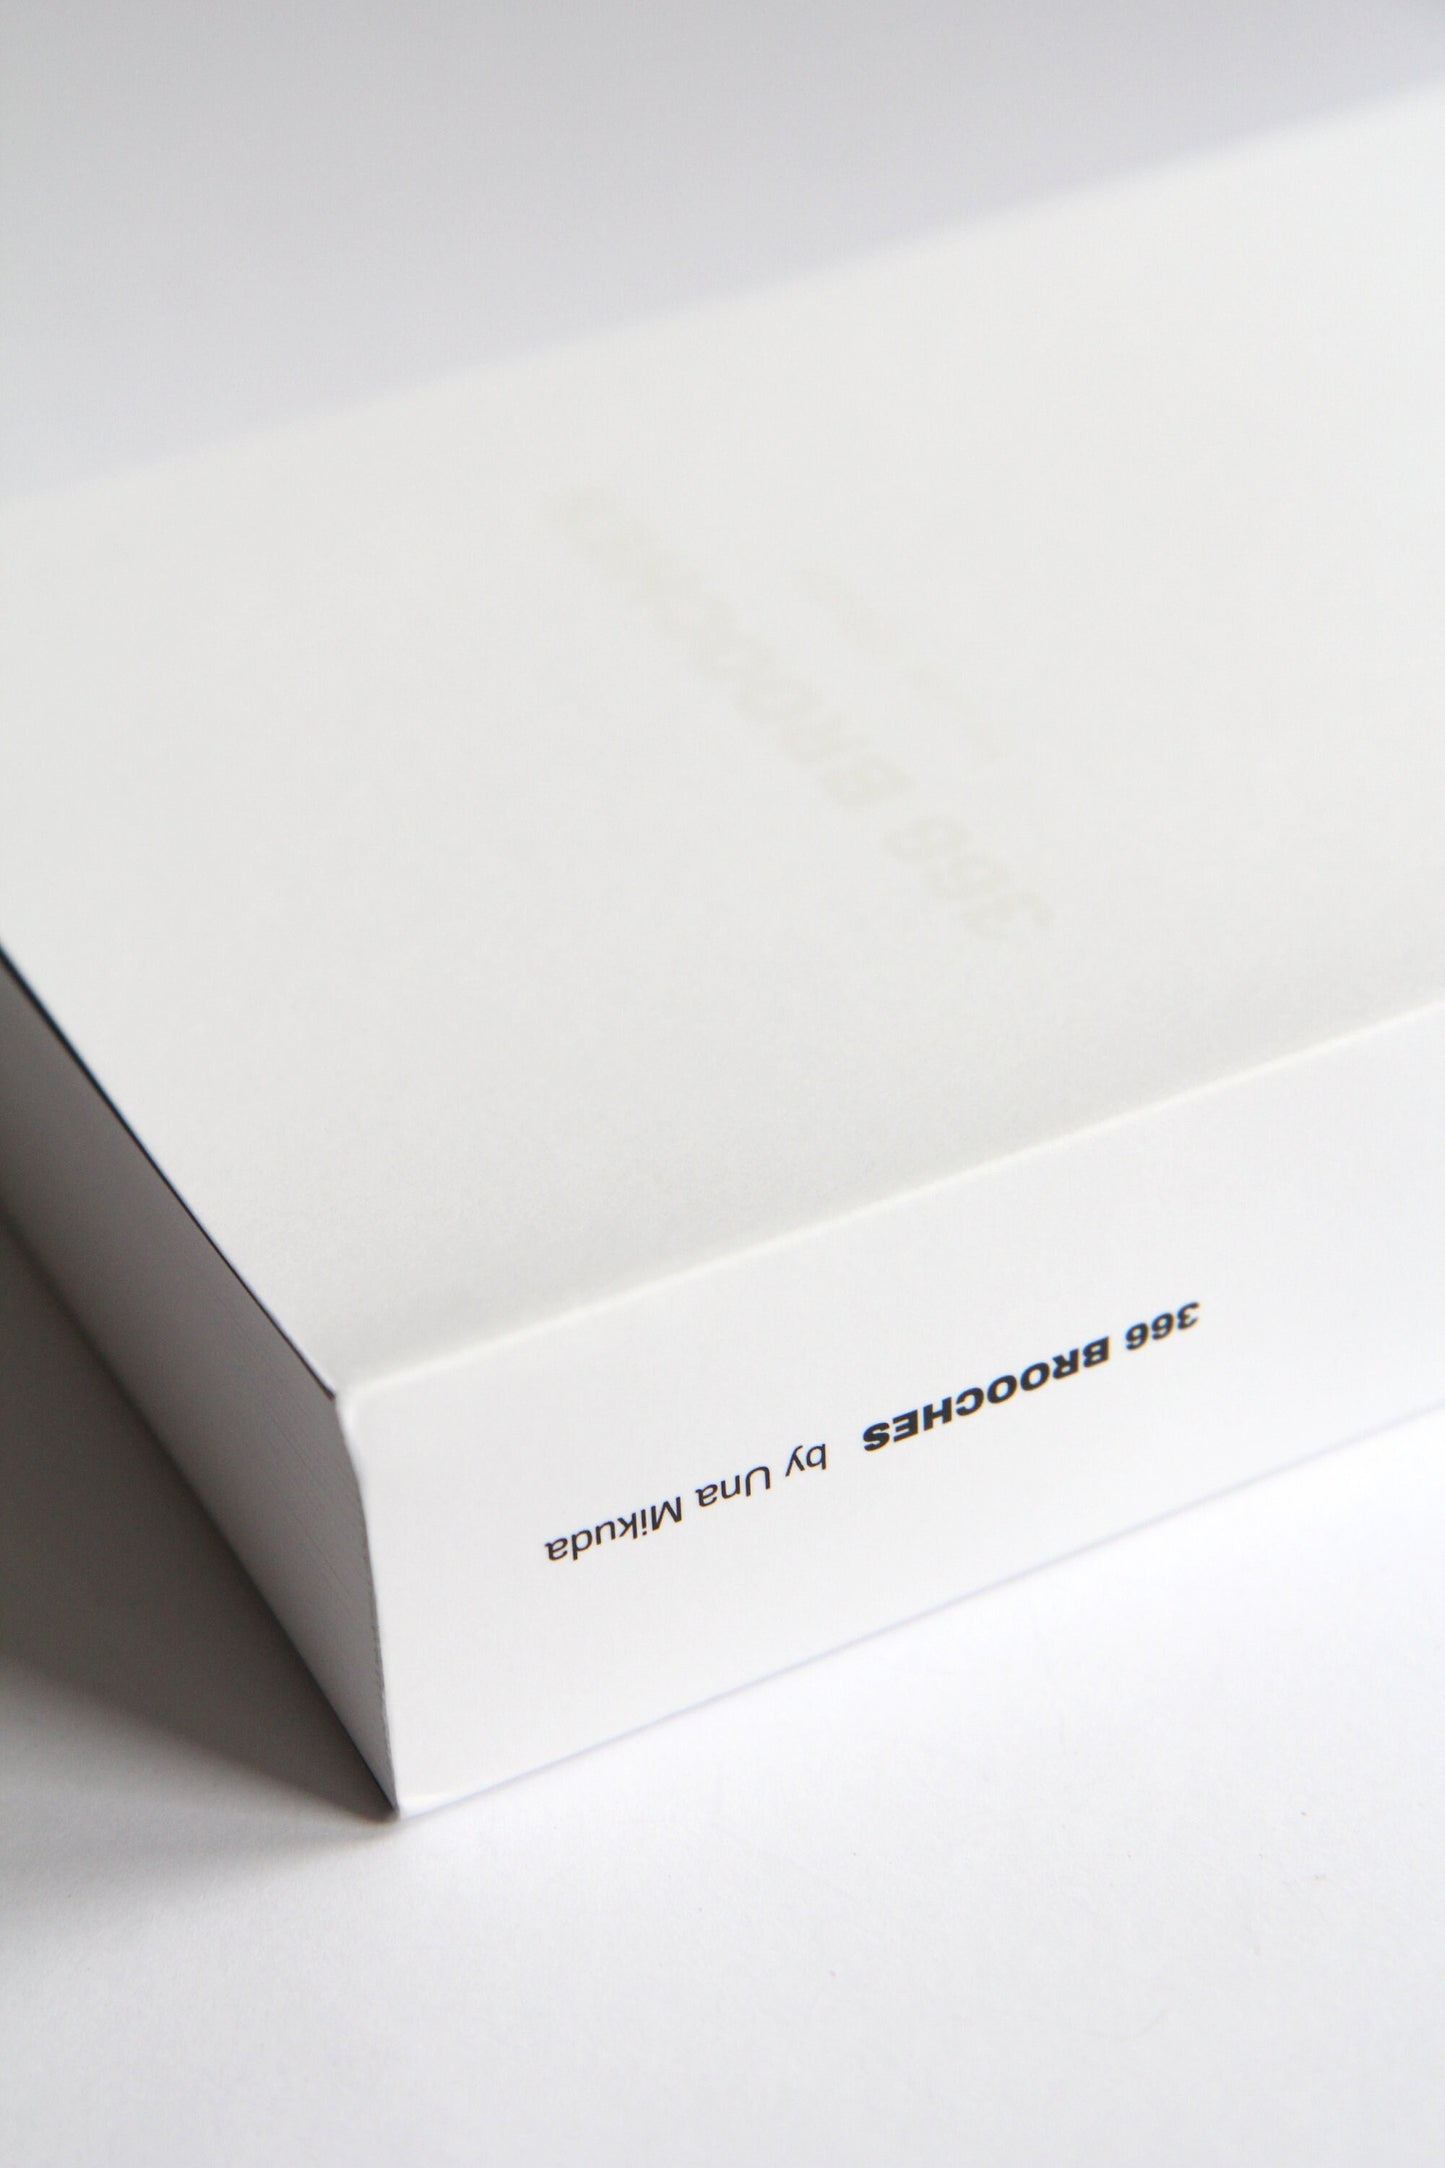 Exclusive! Limited edition jewelry book "366 BROOCHES by Una Mikuda"